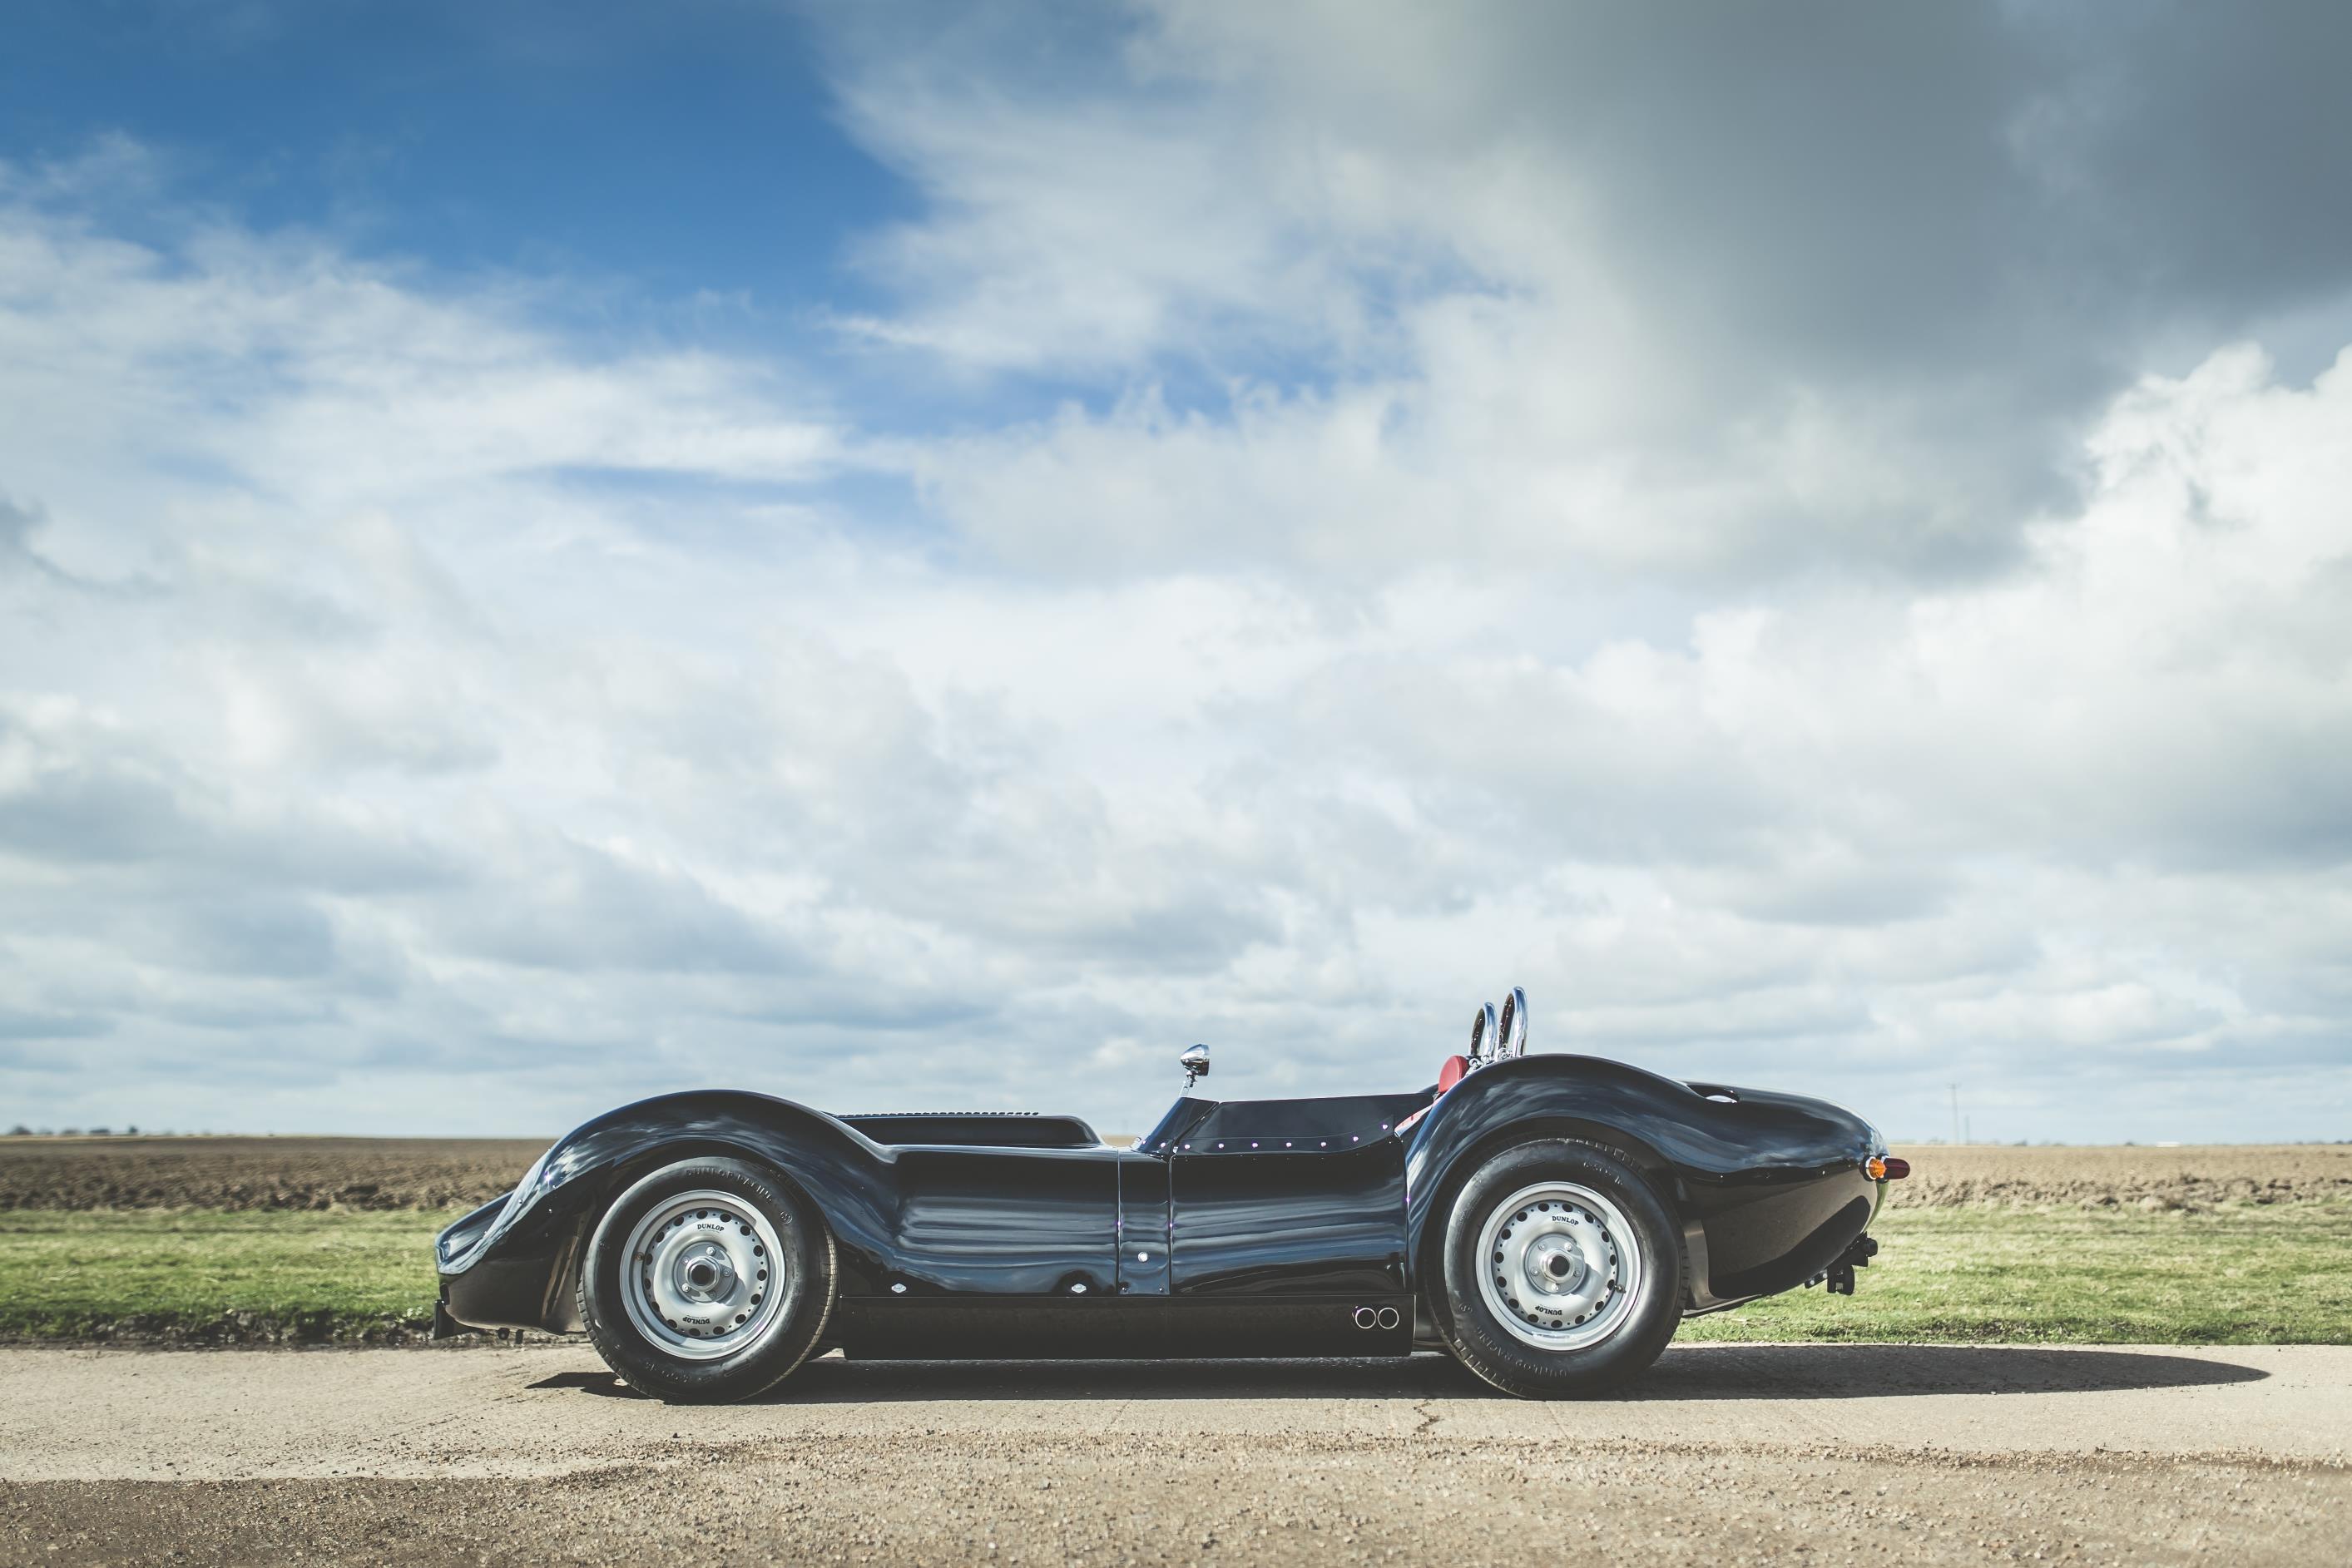 Lister Knobbly for the Road